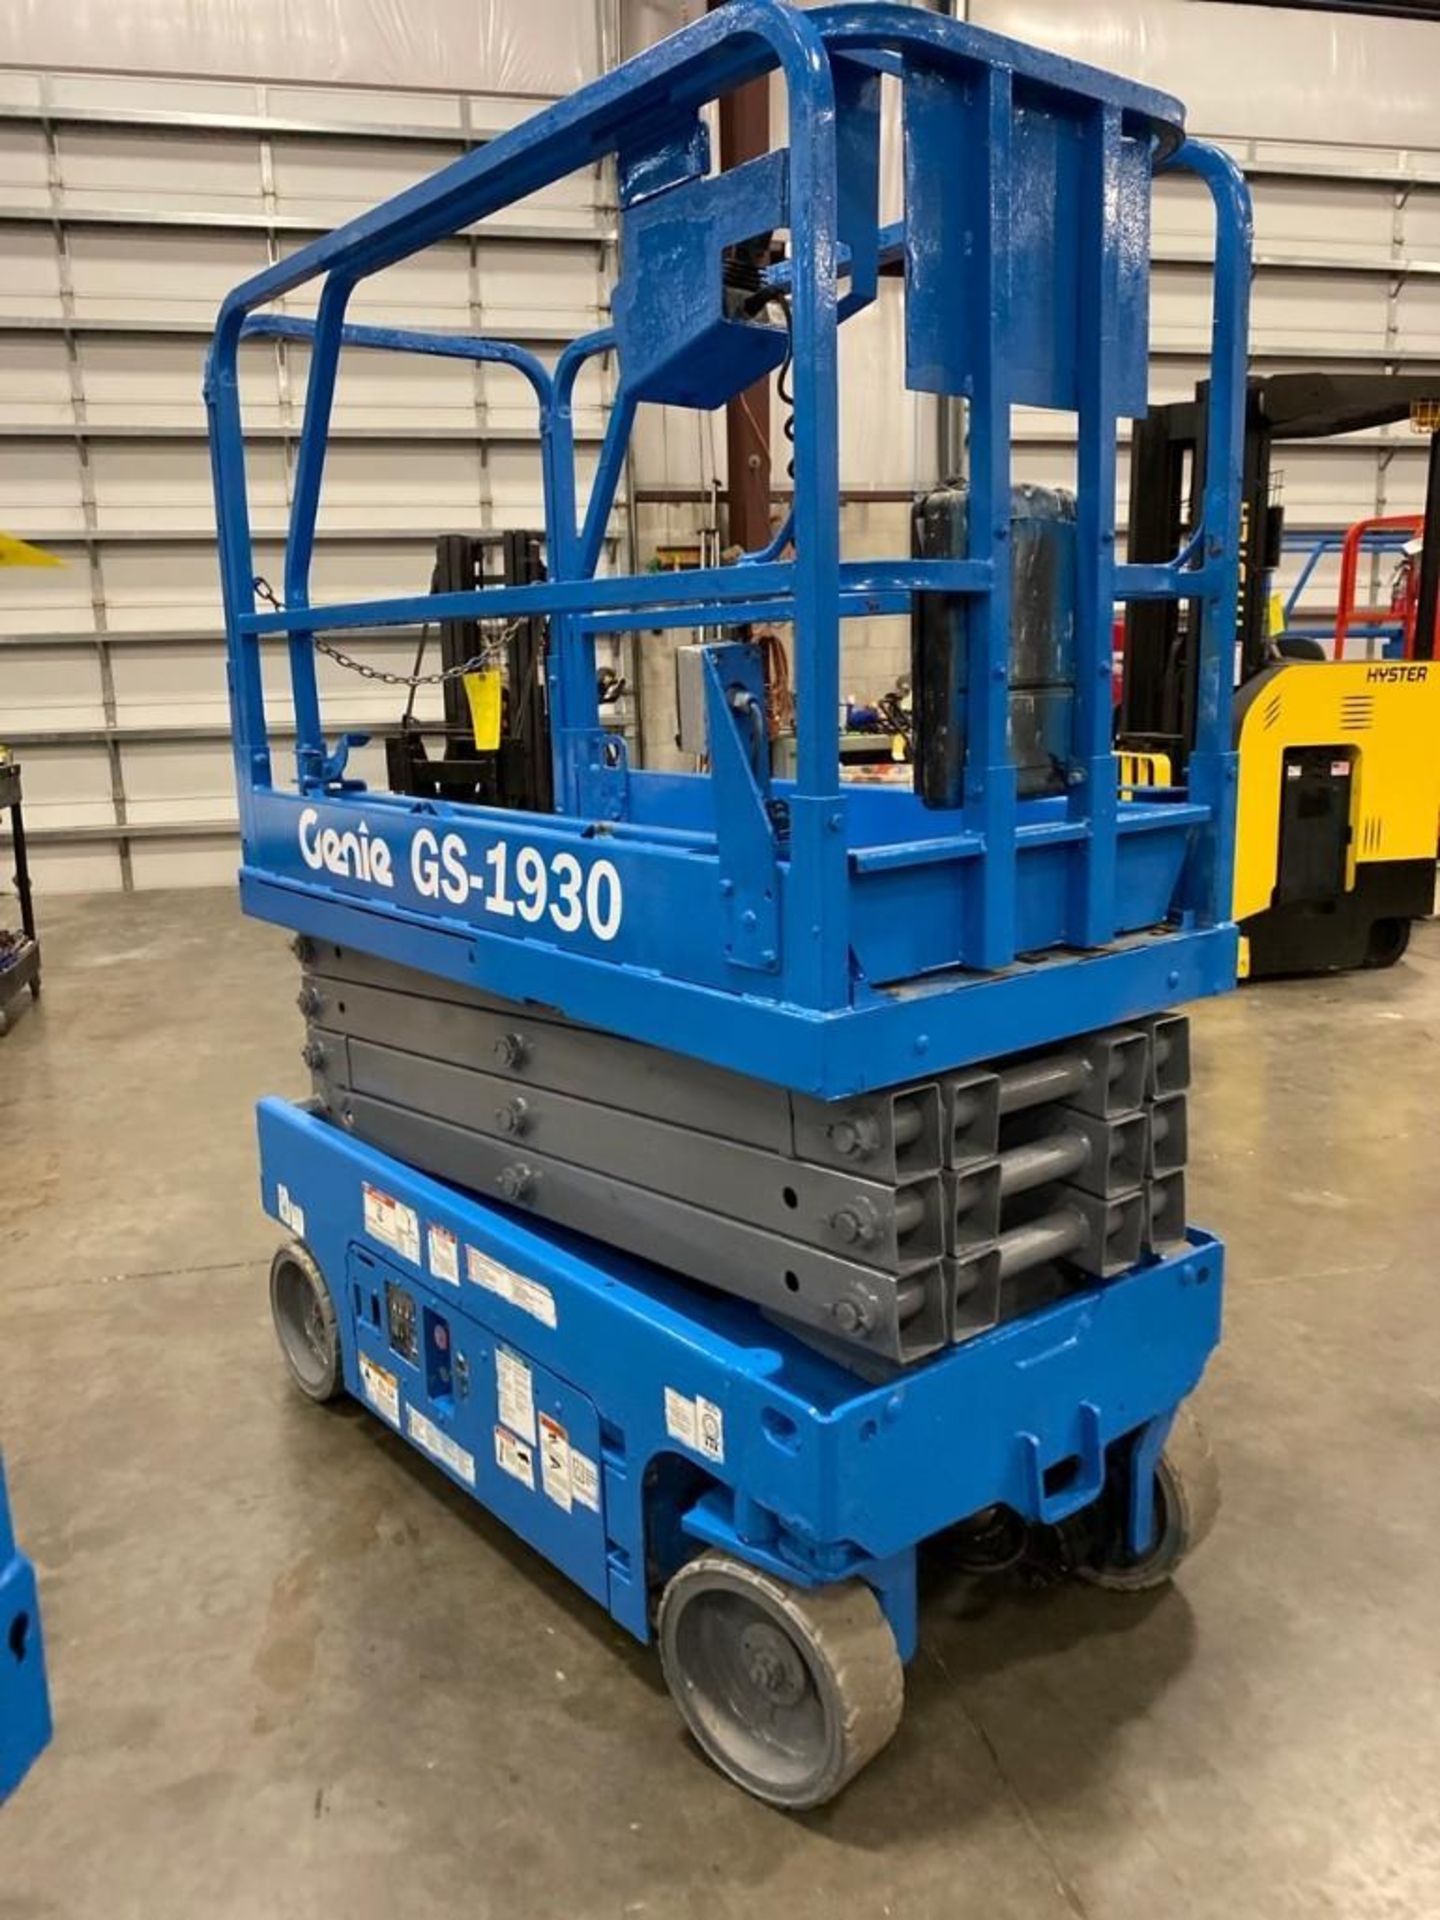 2013 GENIE GS-1930 ELECTRIC SCISSOR LIFT, SELF PROPELLED, 19' PLATFORM HEIGHT, BUILT IN BATTERY CHAR - Image 4 of 7